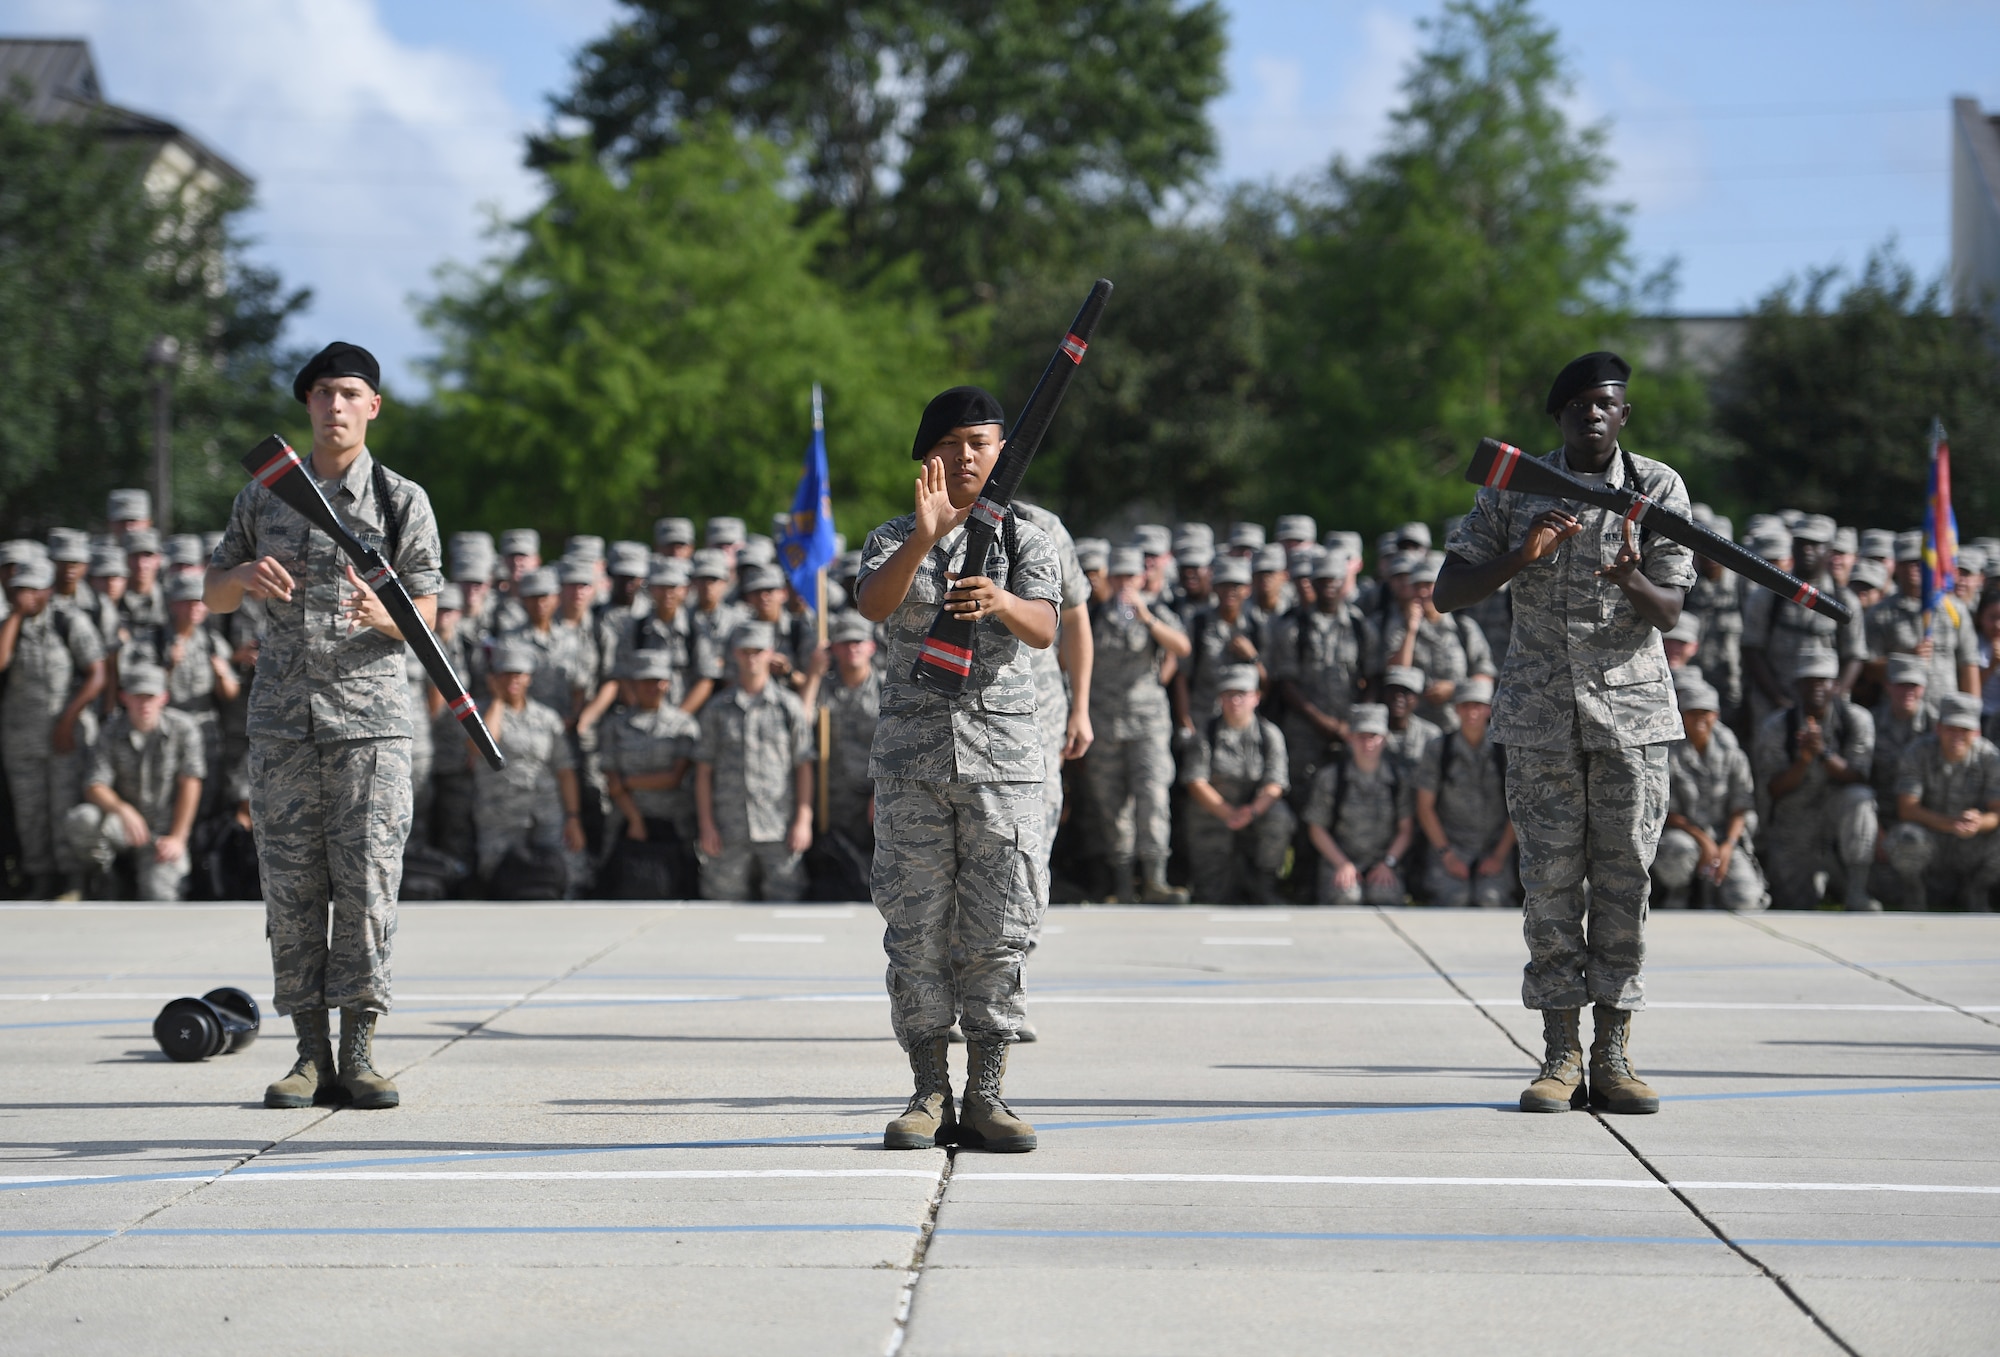 The Keesler Air Force Base freestyle drill team performs their routine at the Levitow Training Support Facility drill pad on Keesler Air Force Base, Mississippi, May 21, 2019. The drill teams, made up of Airmen from various squadrons within the 81st Training Group, debuted their performances in front of base leadership and their peers. Every year both the regulation and freestyle teams compete at Lackland Air Force Base, Texas, for "Best Technical Training Drill Team of the Year." However, this year it was cancelled due to inclement weather. (U.S. Air Force photo by Kemberly Groue)